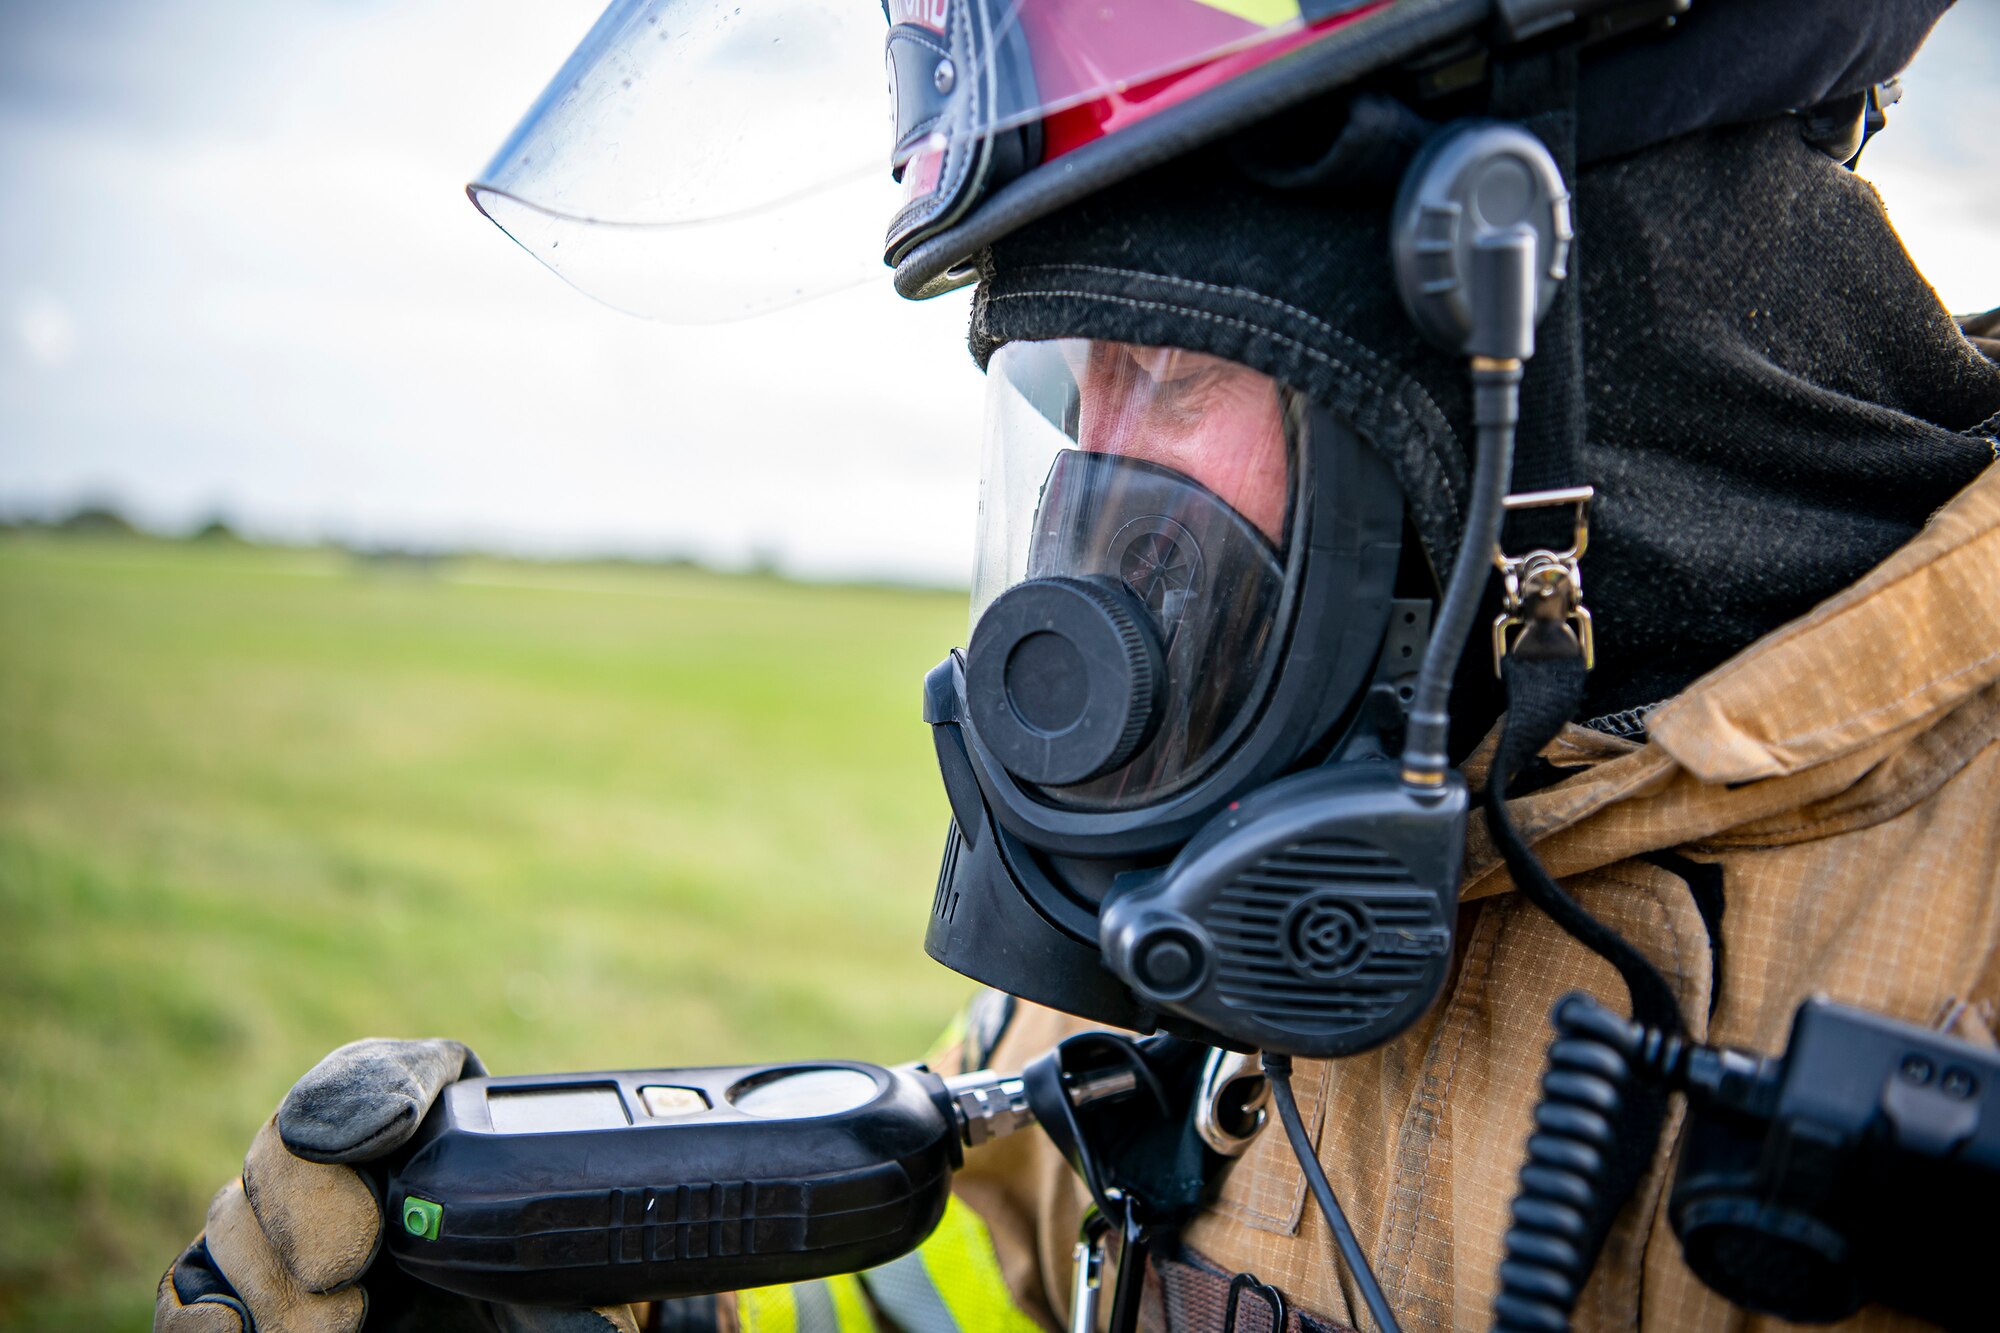 A firefighter from the 422d Fire Emergency Services, monitors his oxygen levels during a live-fire training exercise at RAF Fairford, England, Oct. 3, 2022. Firefighters from the 422d FES, are required to complete live-fire training bi-annualy to test thief overall readiness and ability to properly extinguish an aircraft fire. (U.S. Air Force photo by Staff Sgt. Eugene Oliver)